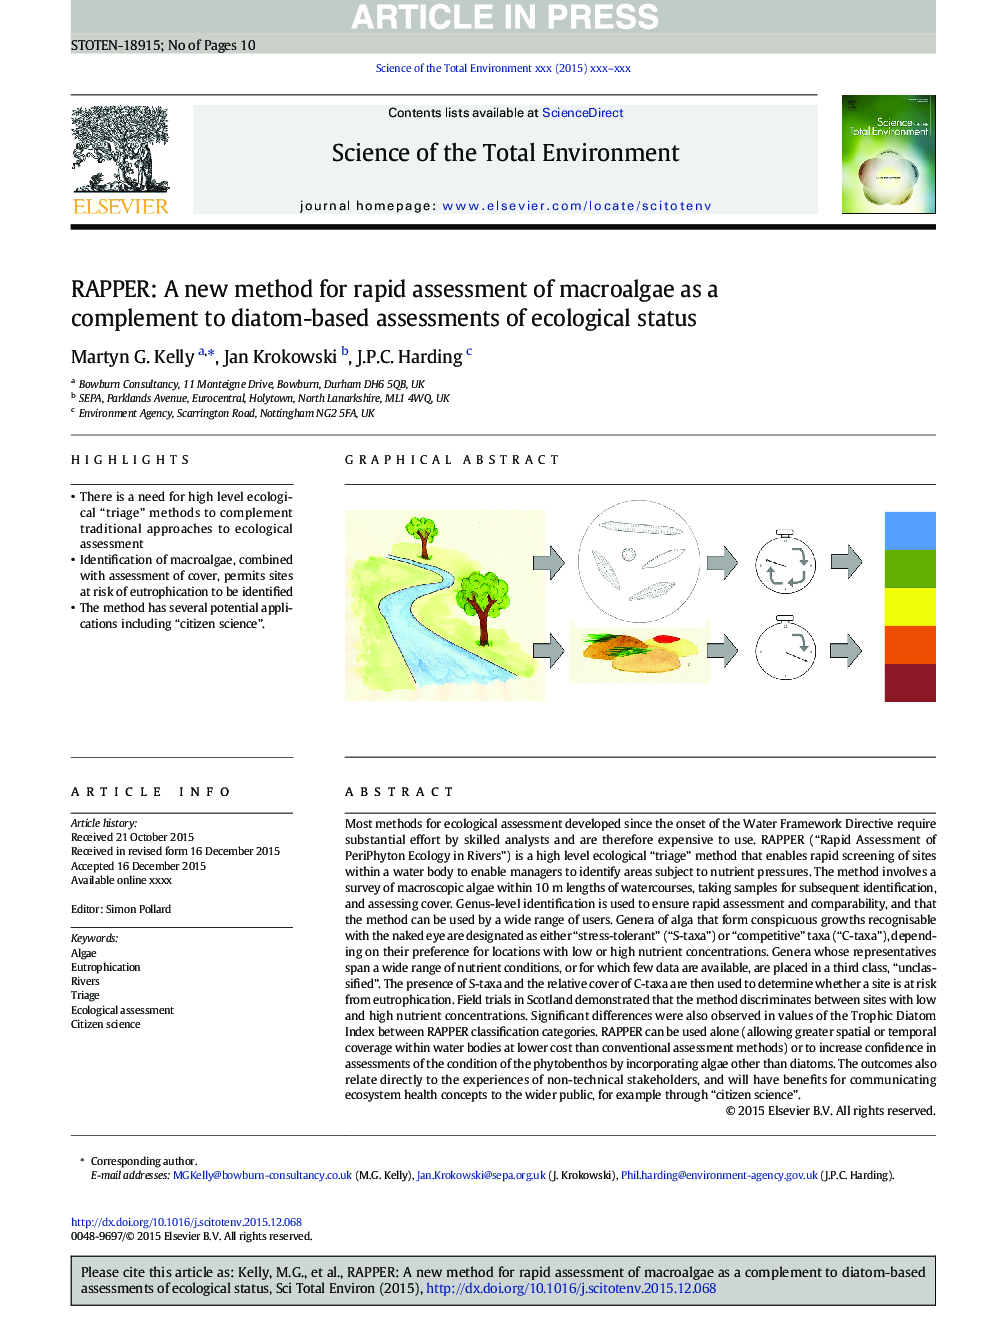 RAPPER: A new method for rapid assessment of macroalgae as a complement to diatom-based assessments of ecological status